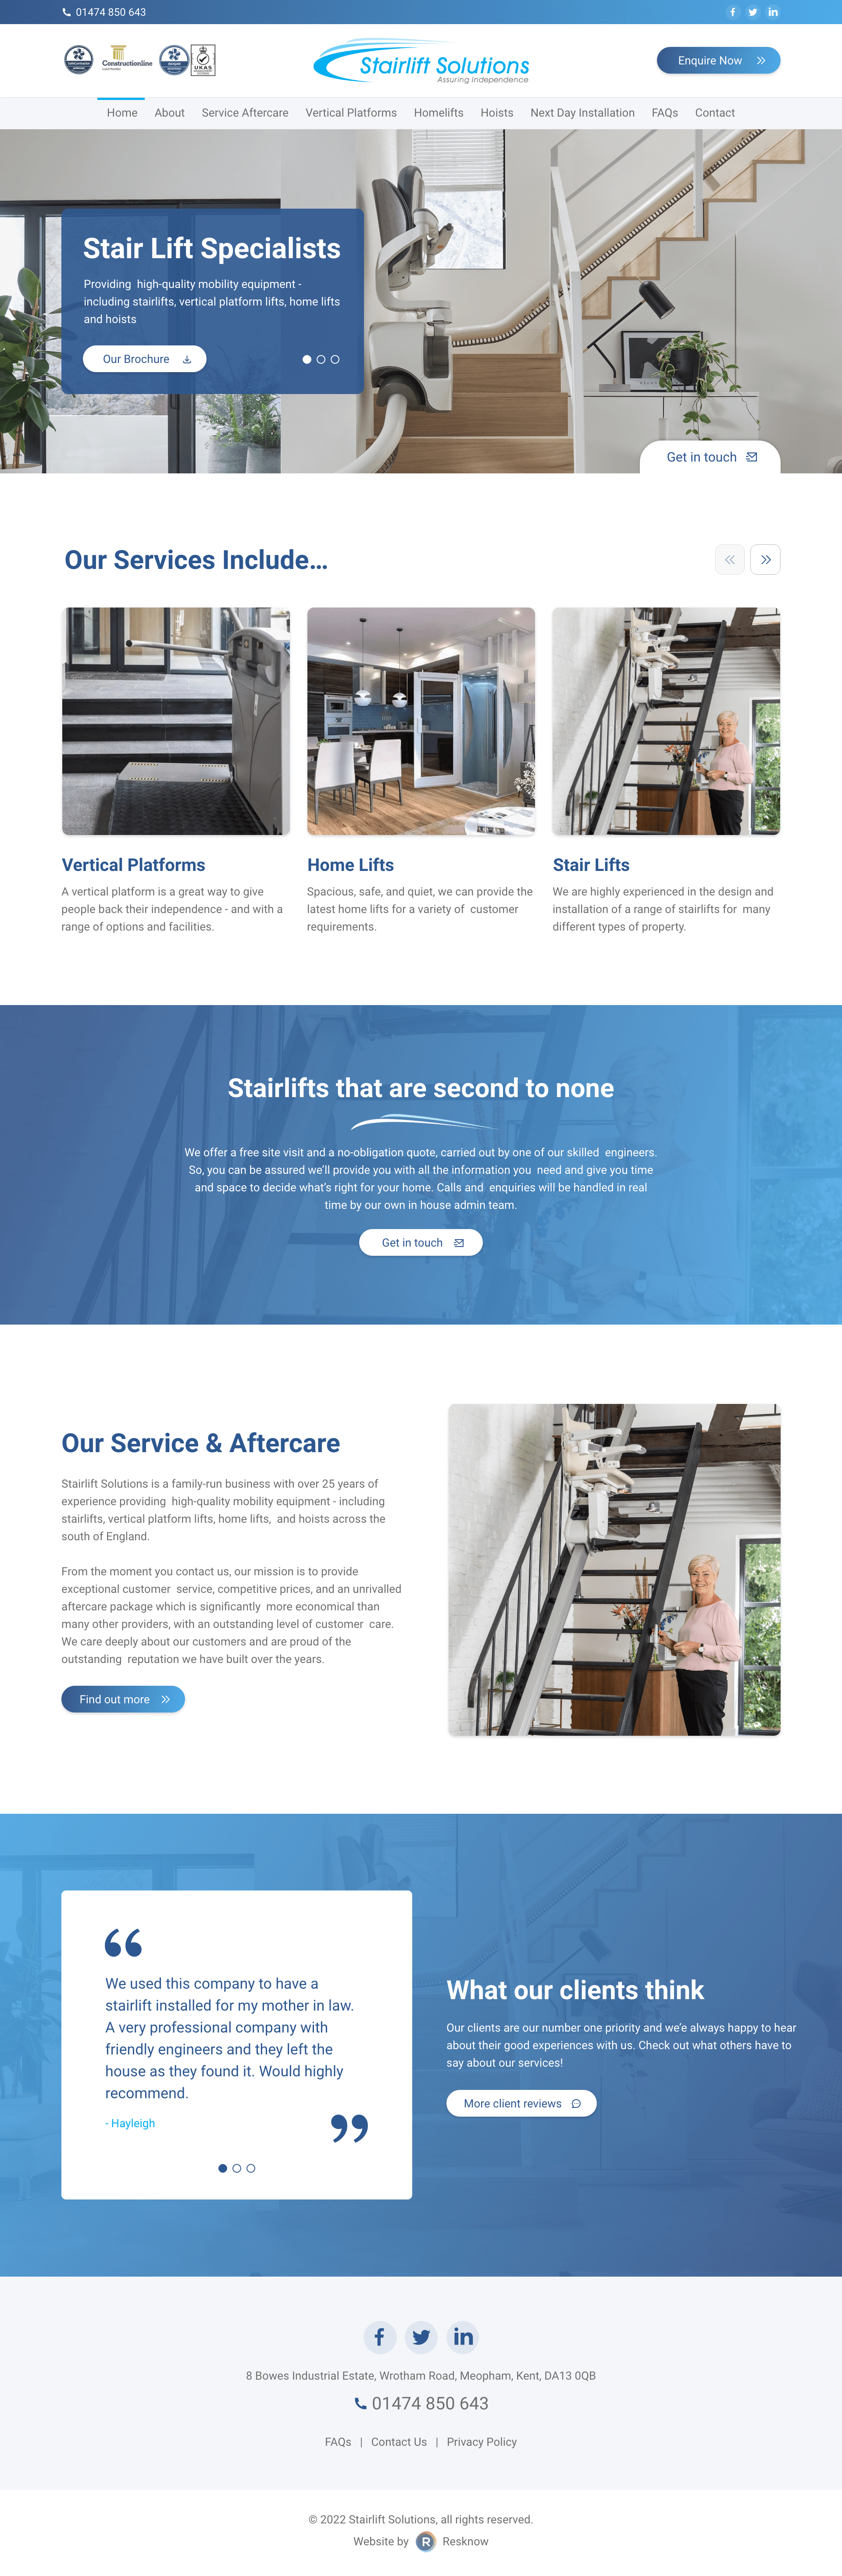 Stairlift Solutions Website Mockup